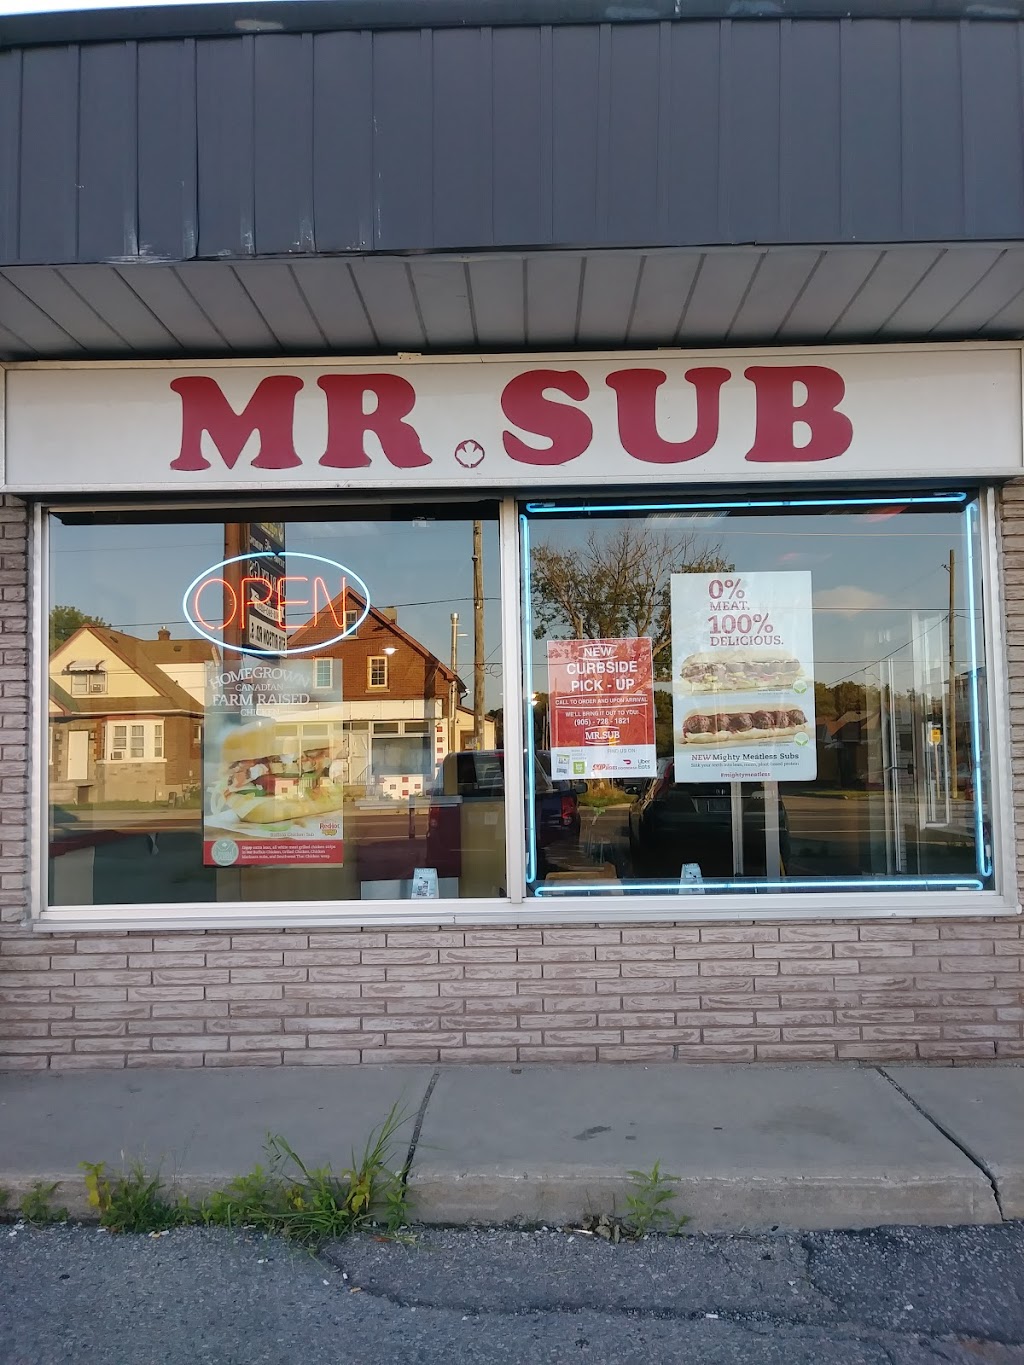 Mr.Sub | meal takeaway | 576 Ritson Rd S, Oshawa, ON L1H 5K7, Canada | 9057281821 OR +1 905-728-1821